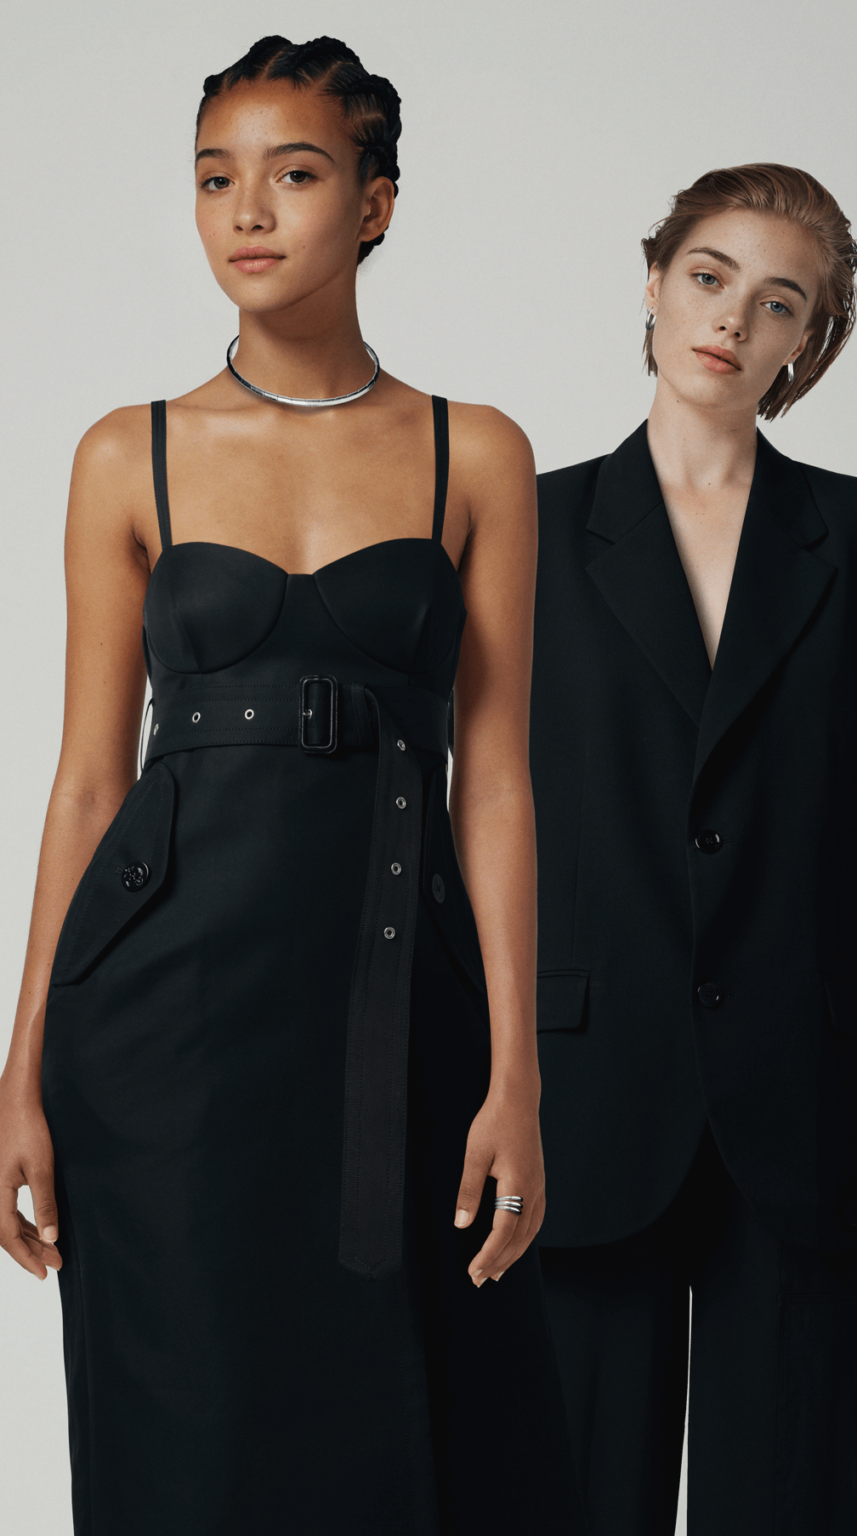 two ai-generated models stand in front of a blank background